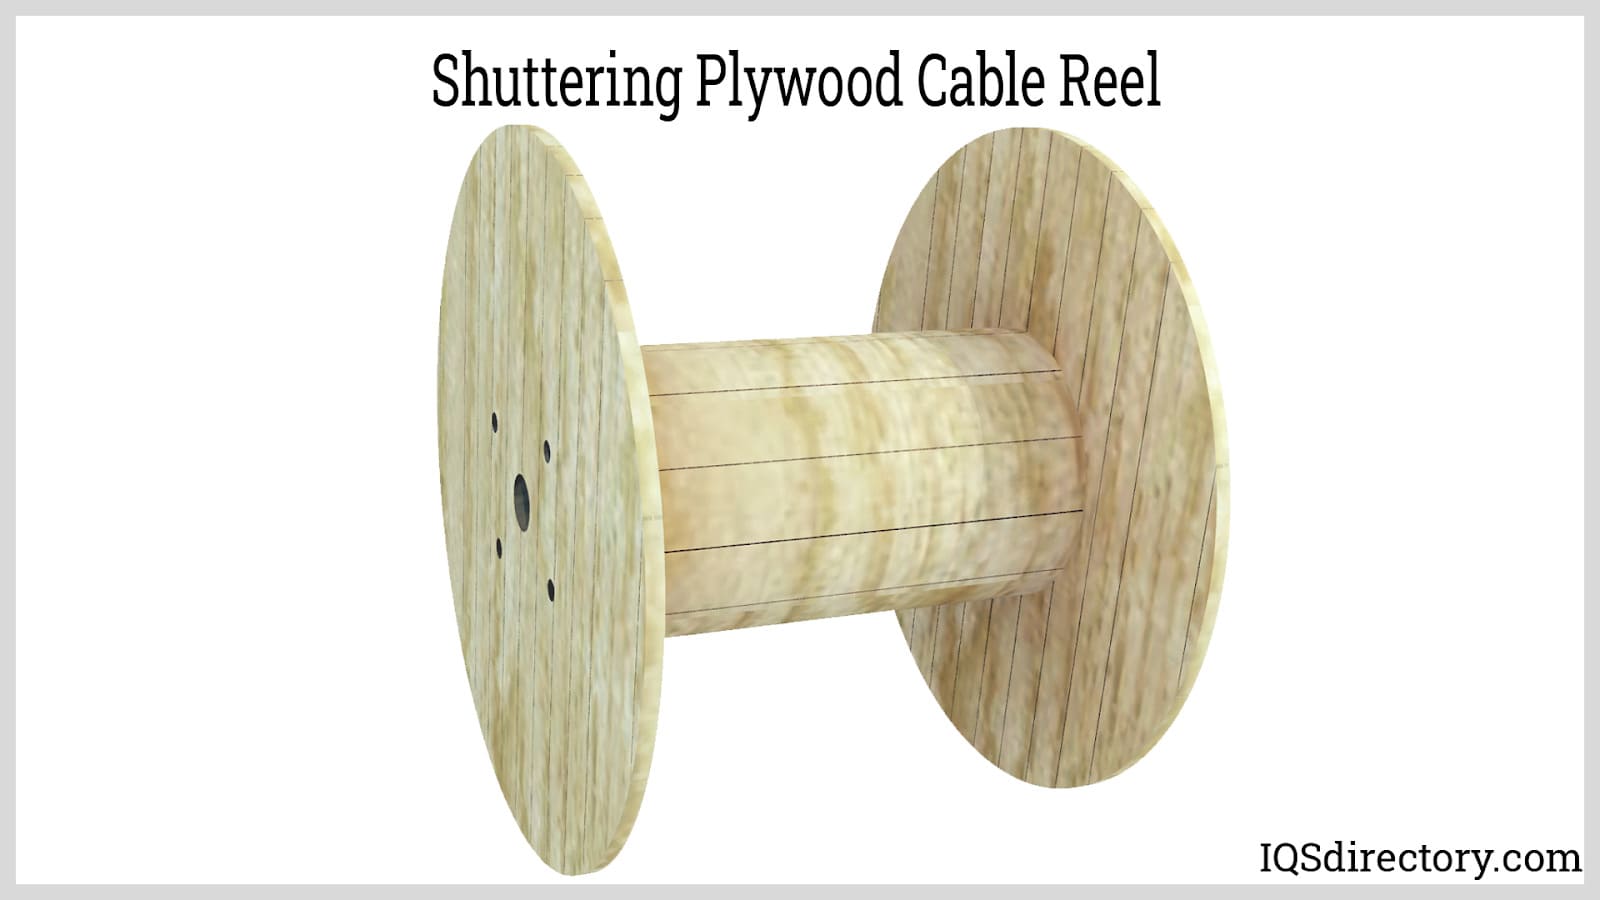 Shuttering Plywood Cable Reel